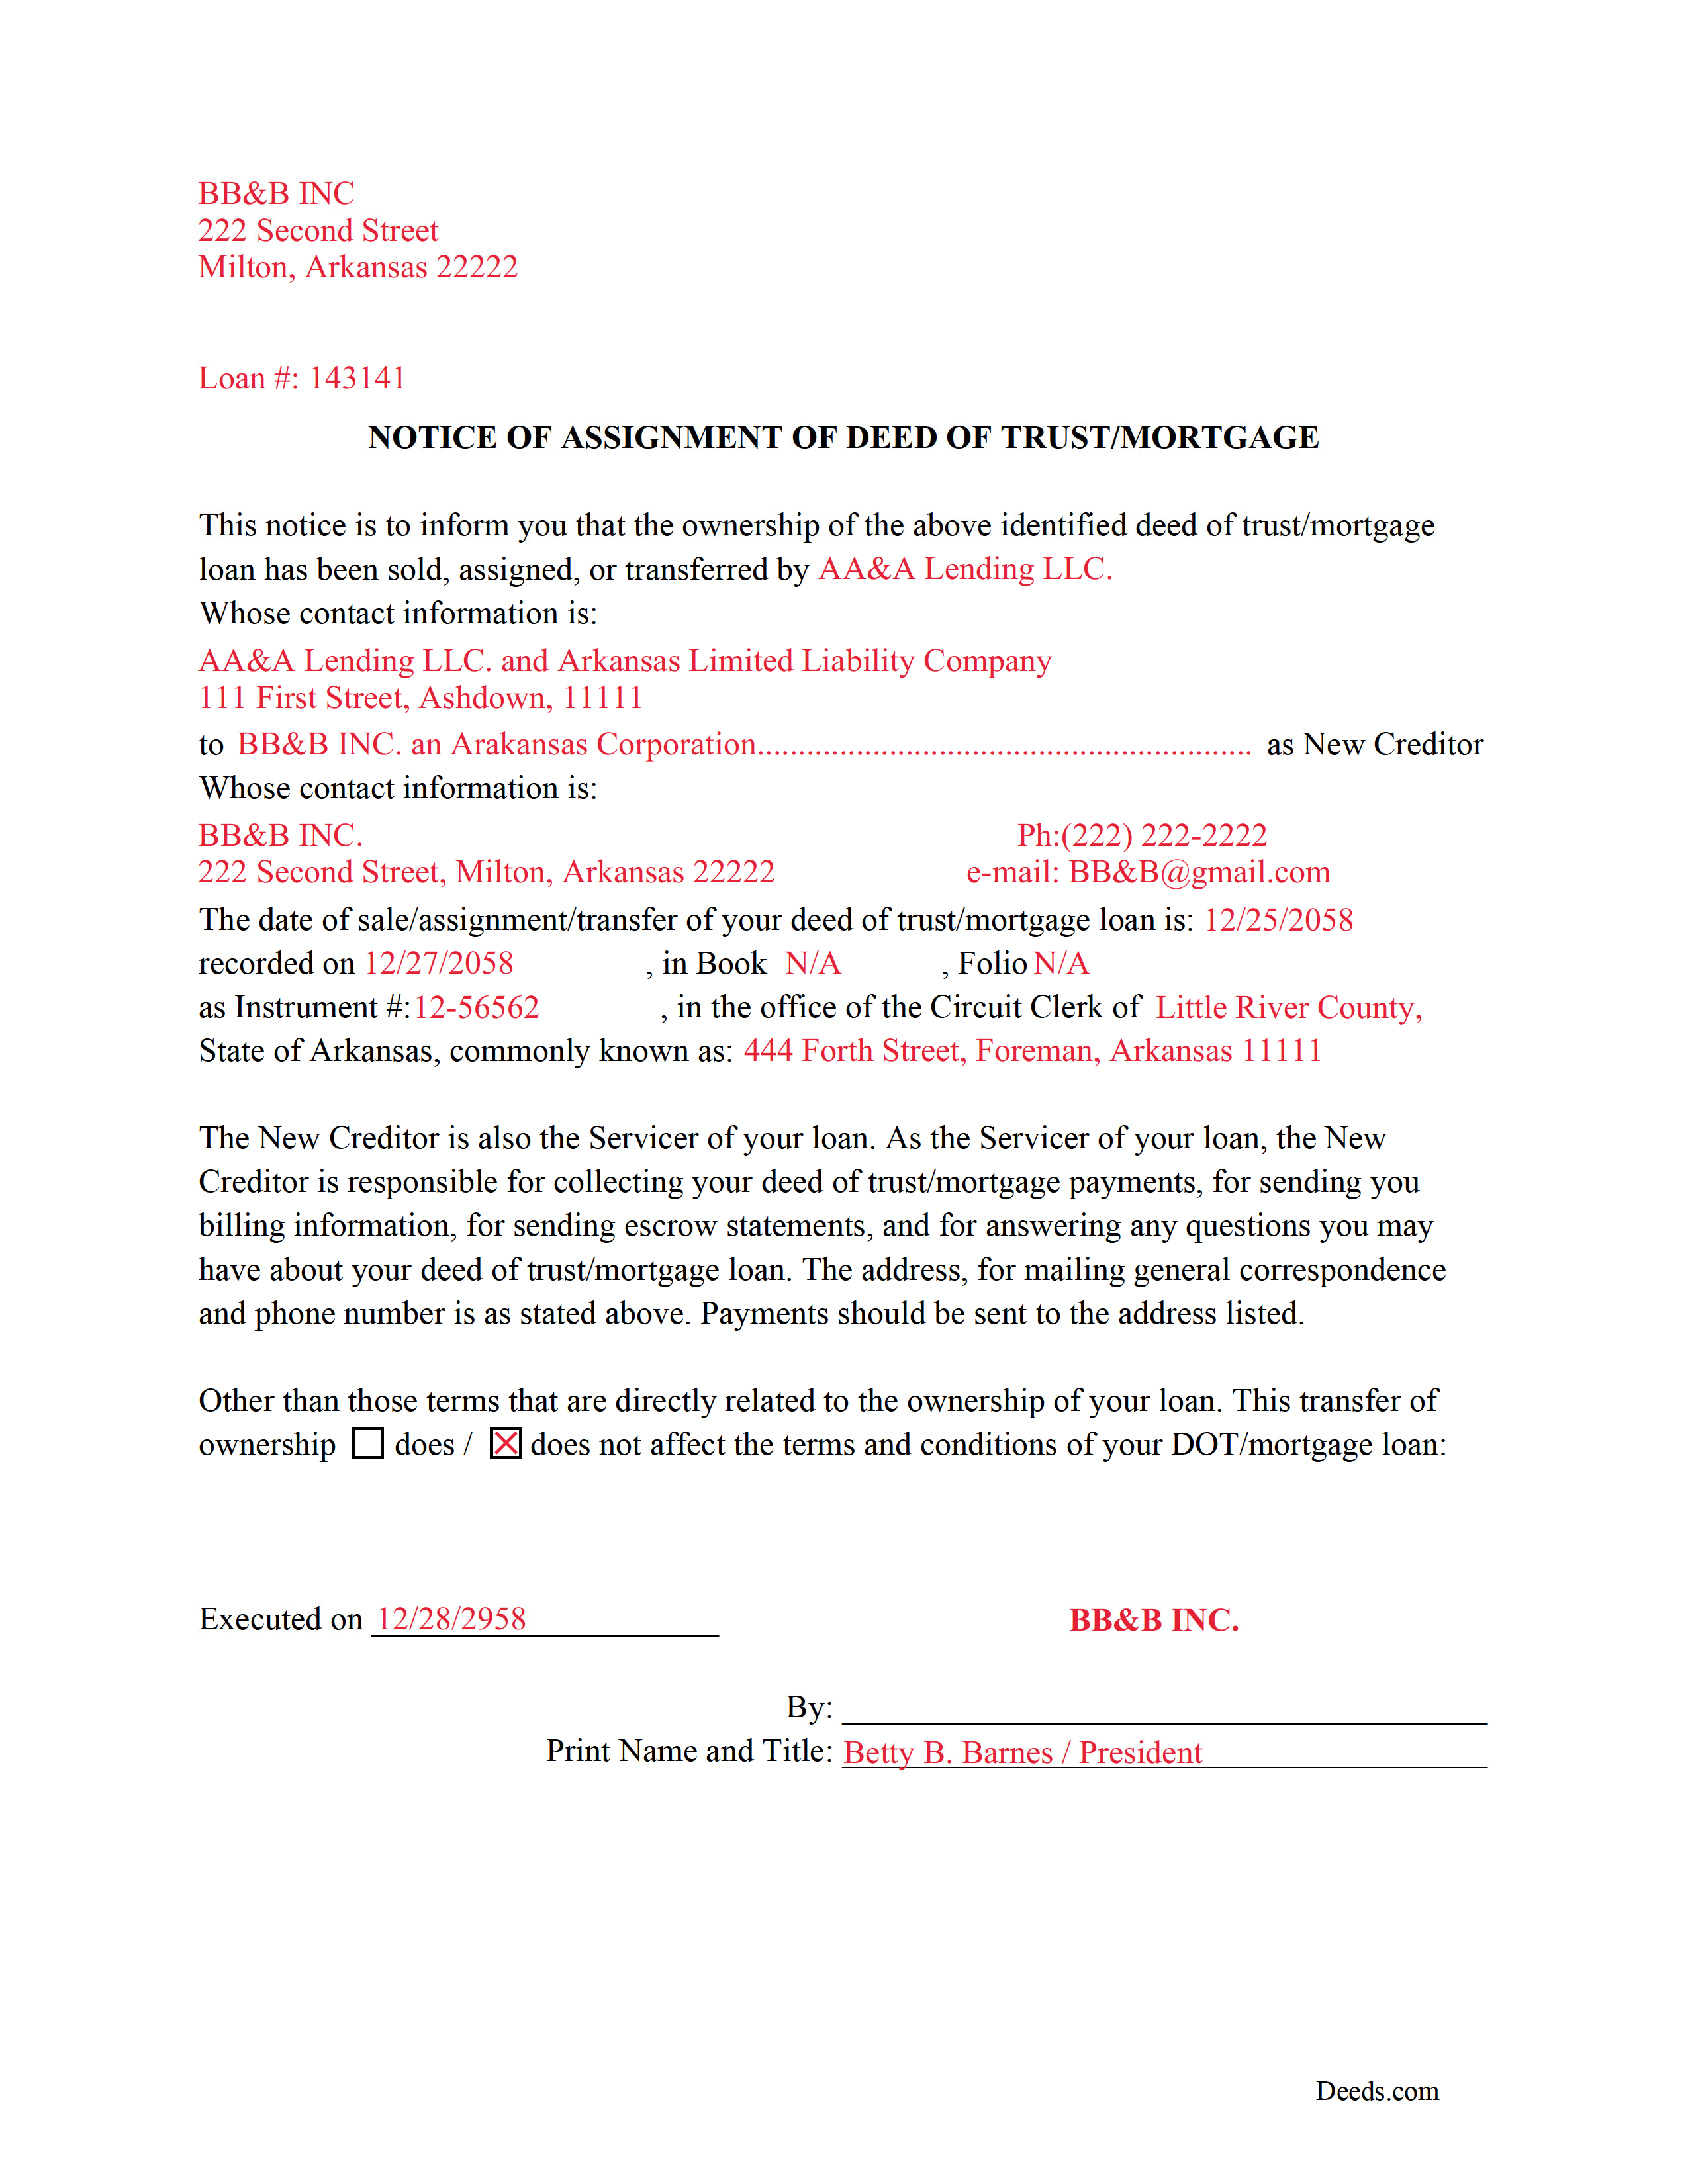 Completed Example of a Notice of Assignment Document